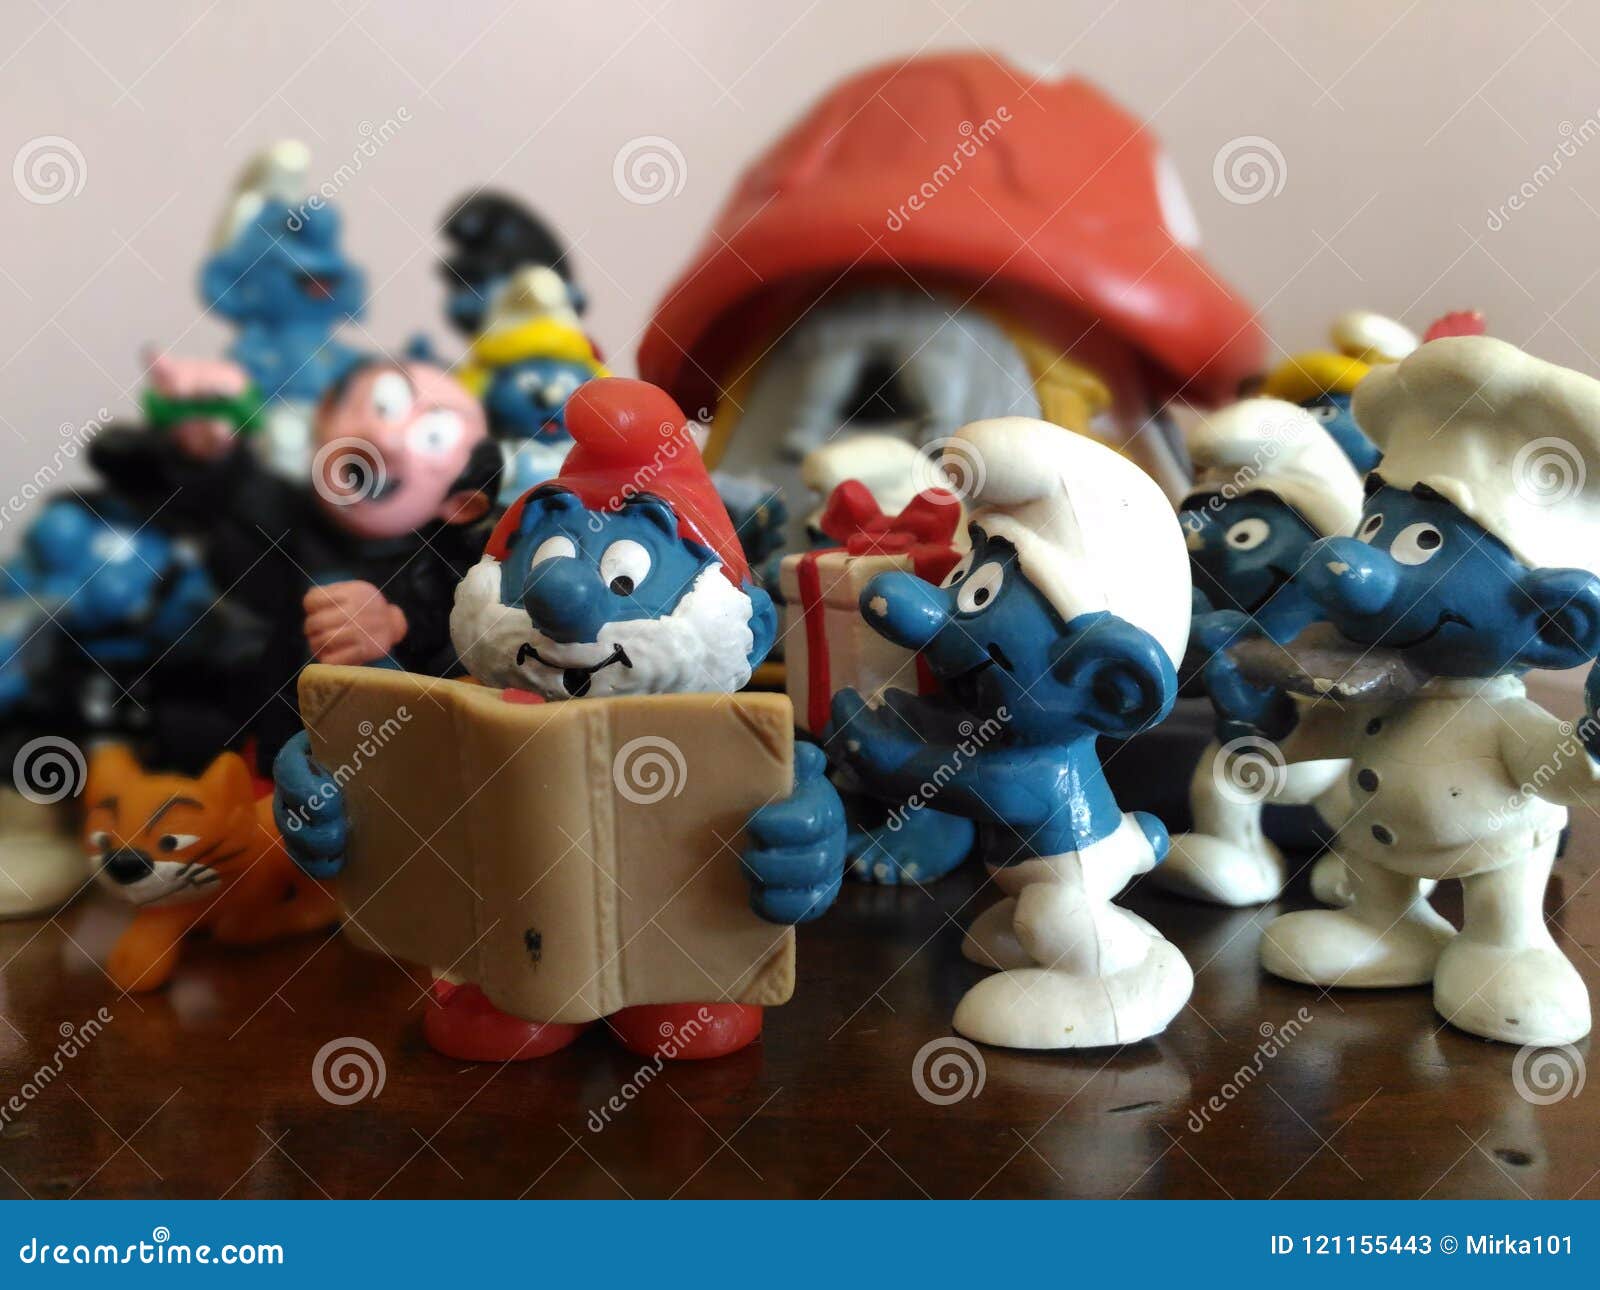 Collectible Toys: the Smurfs! Editorial Stock Photo - Image of rubber,  popular: 121155443